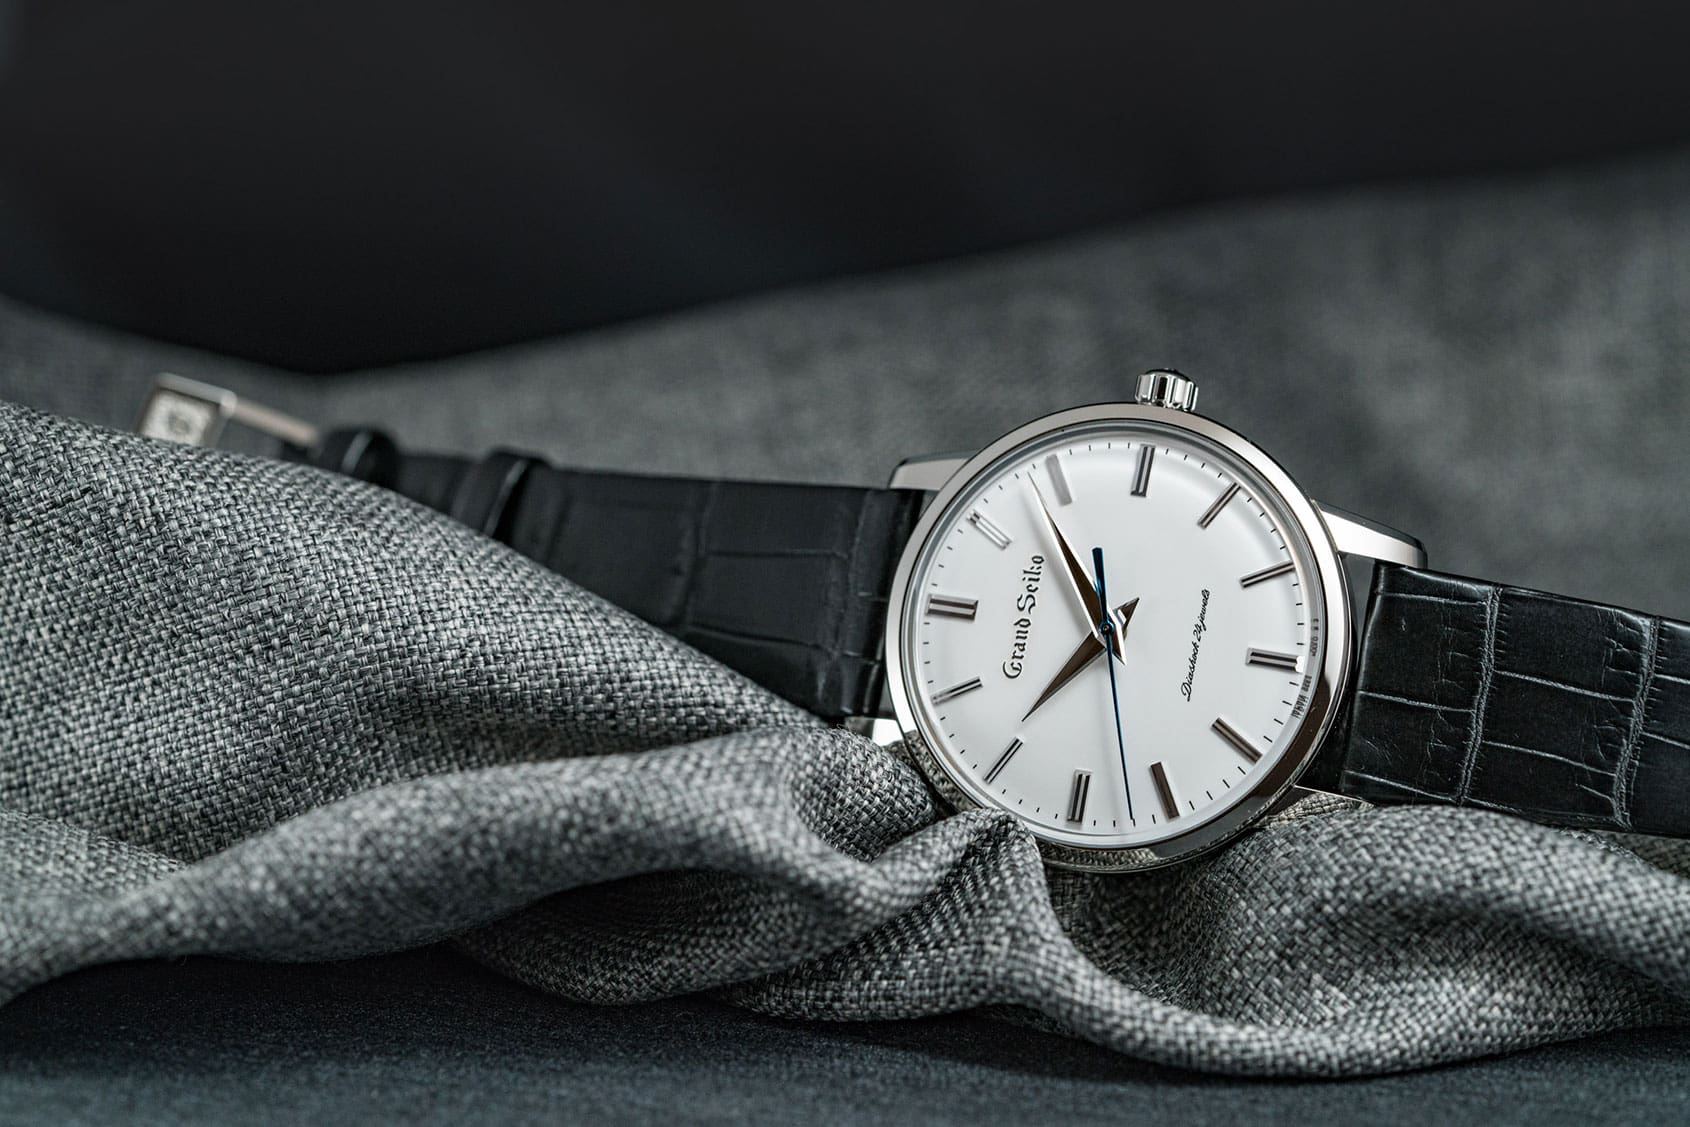 HANDS-ON: Grand Seiko reissue their first ever watch, plus a completely new re-interpretation